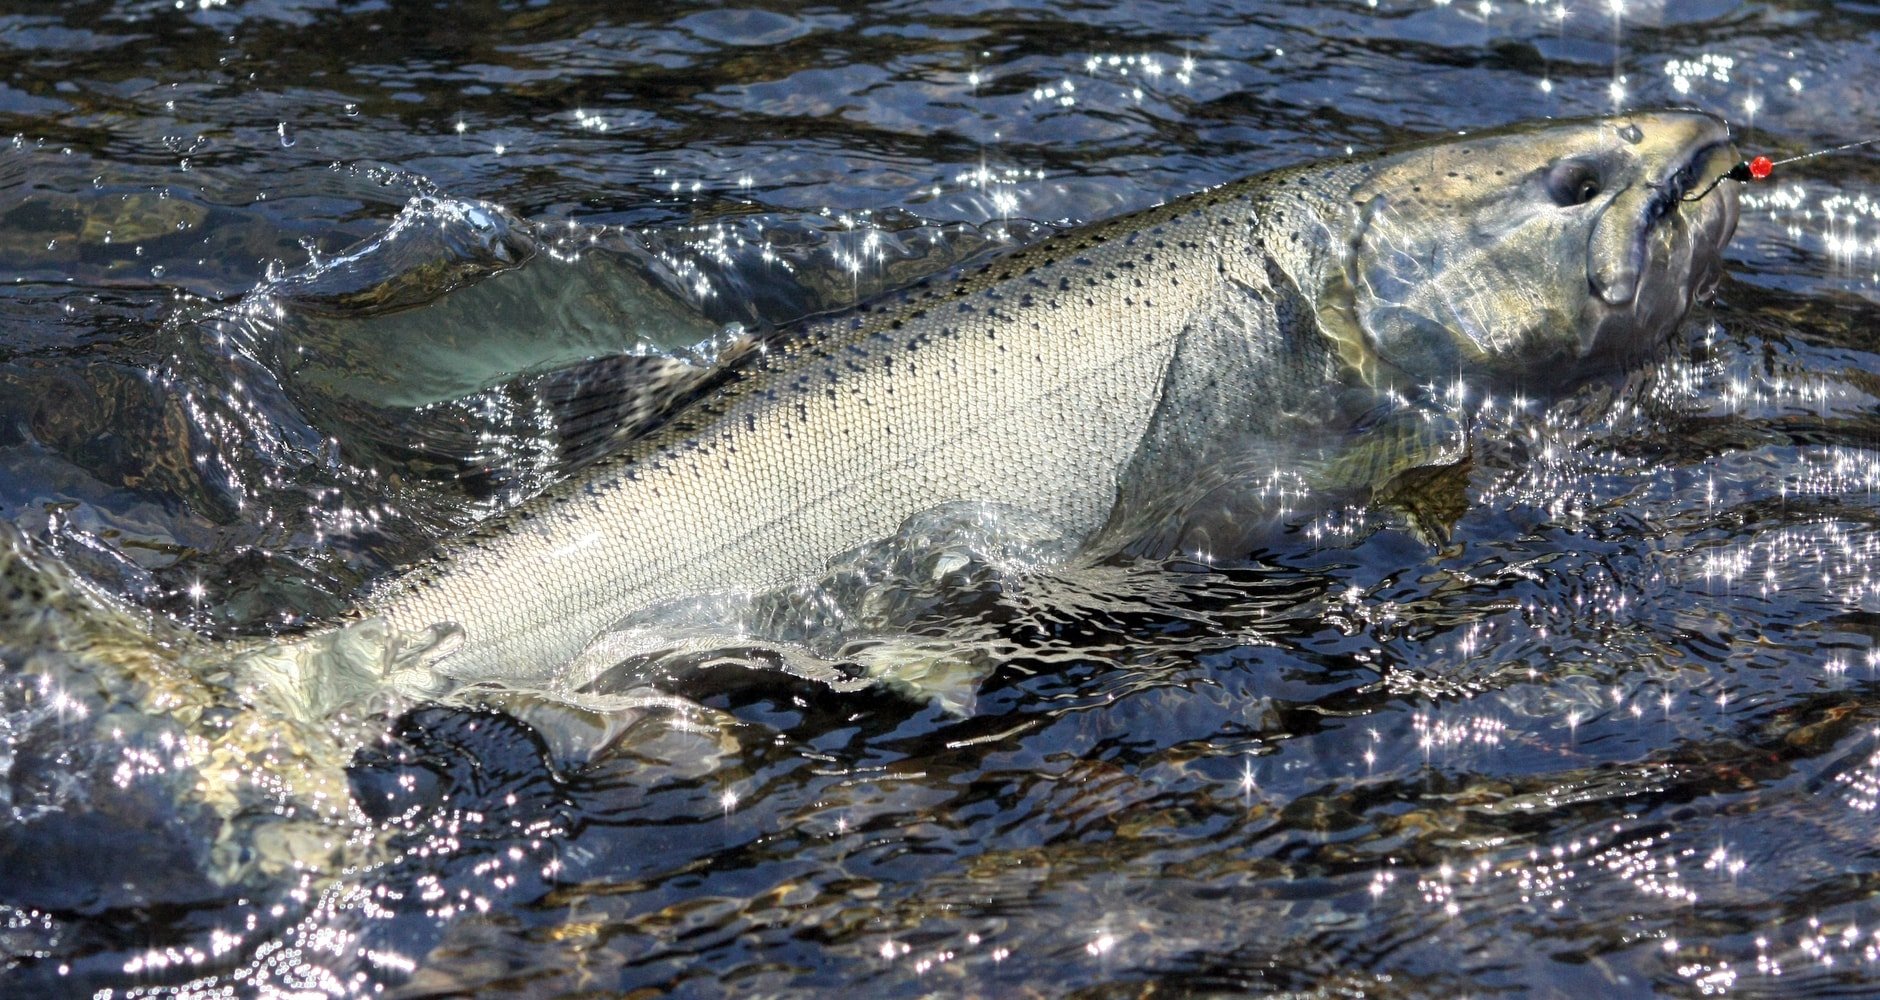 Chinook Salmon are a favorite fishing catch in the Northwest region of the USA.